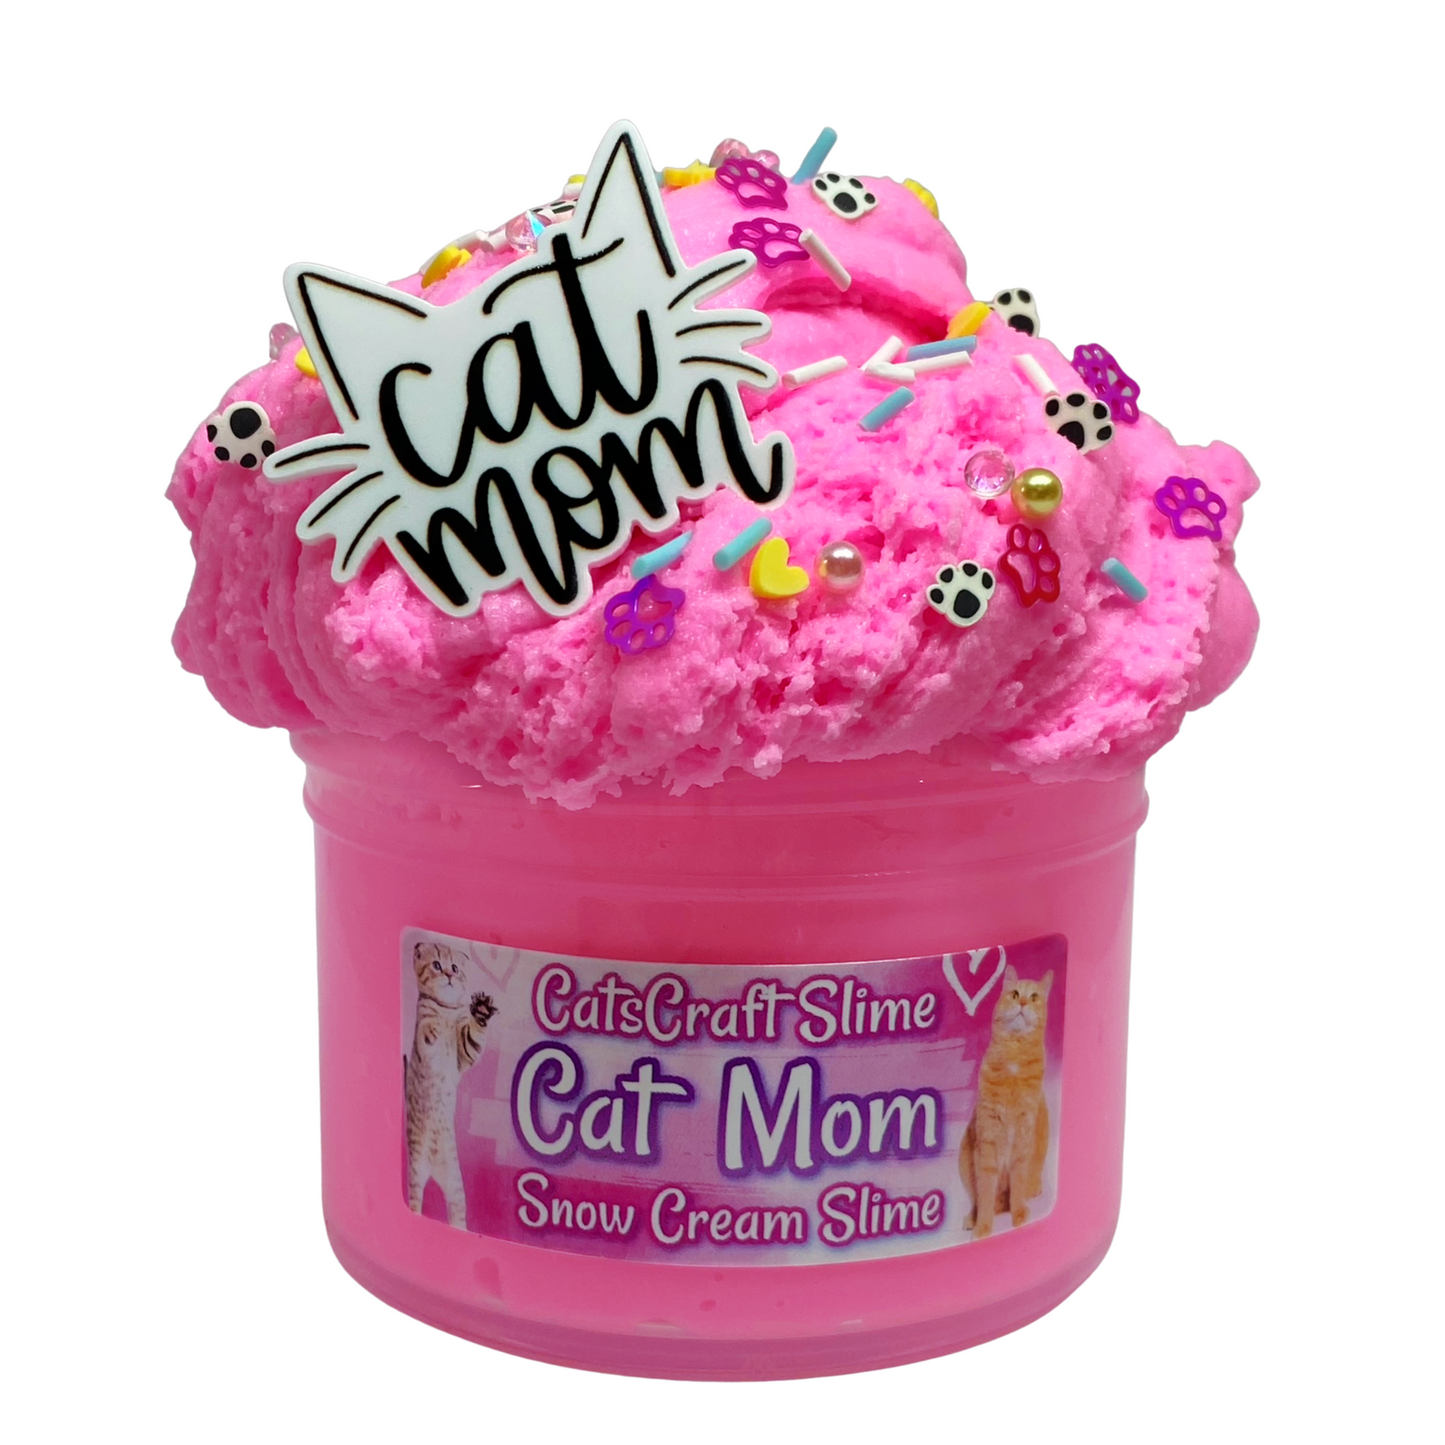 Snow Cream Slime "Cat Mom" Sprinkles Scented with Charm and Inflating Soft ASMR